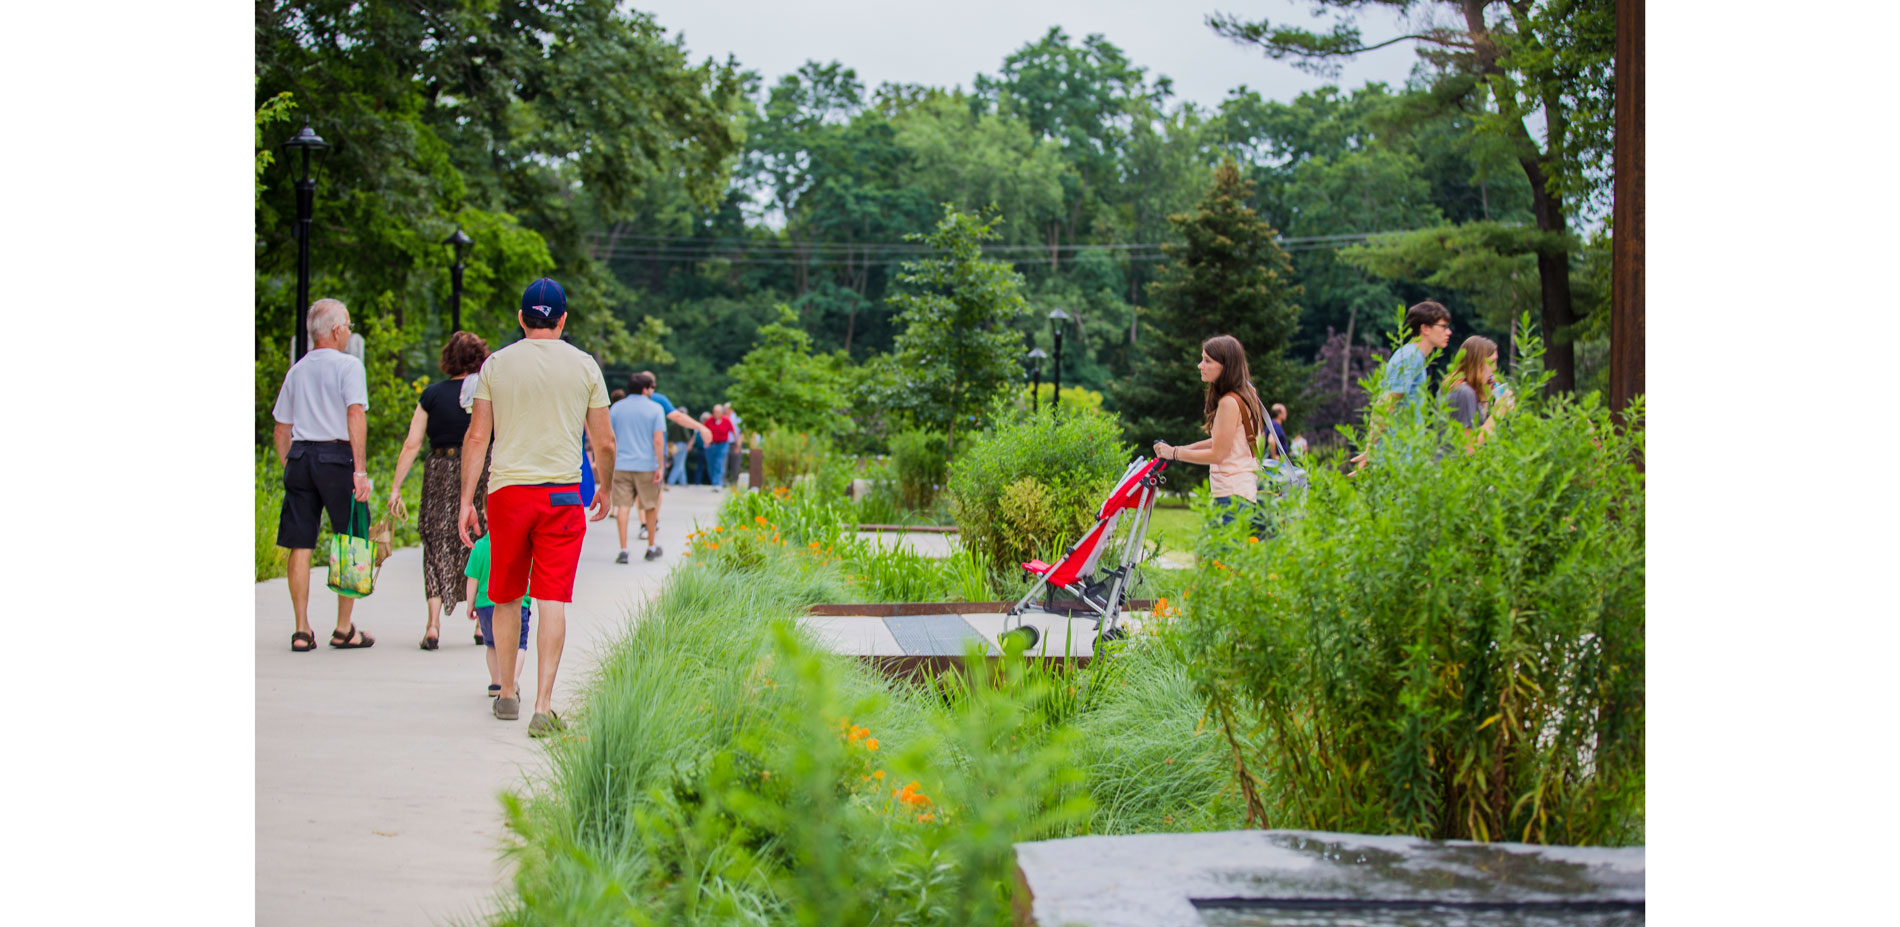 The bioswale is 150’ long and traversed by a series of accessible bridges and decks. The project received a grant to channel stormwater from Main Stre…